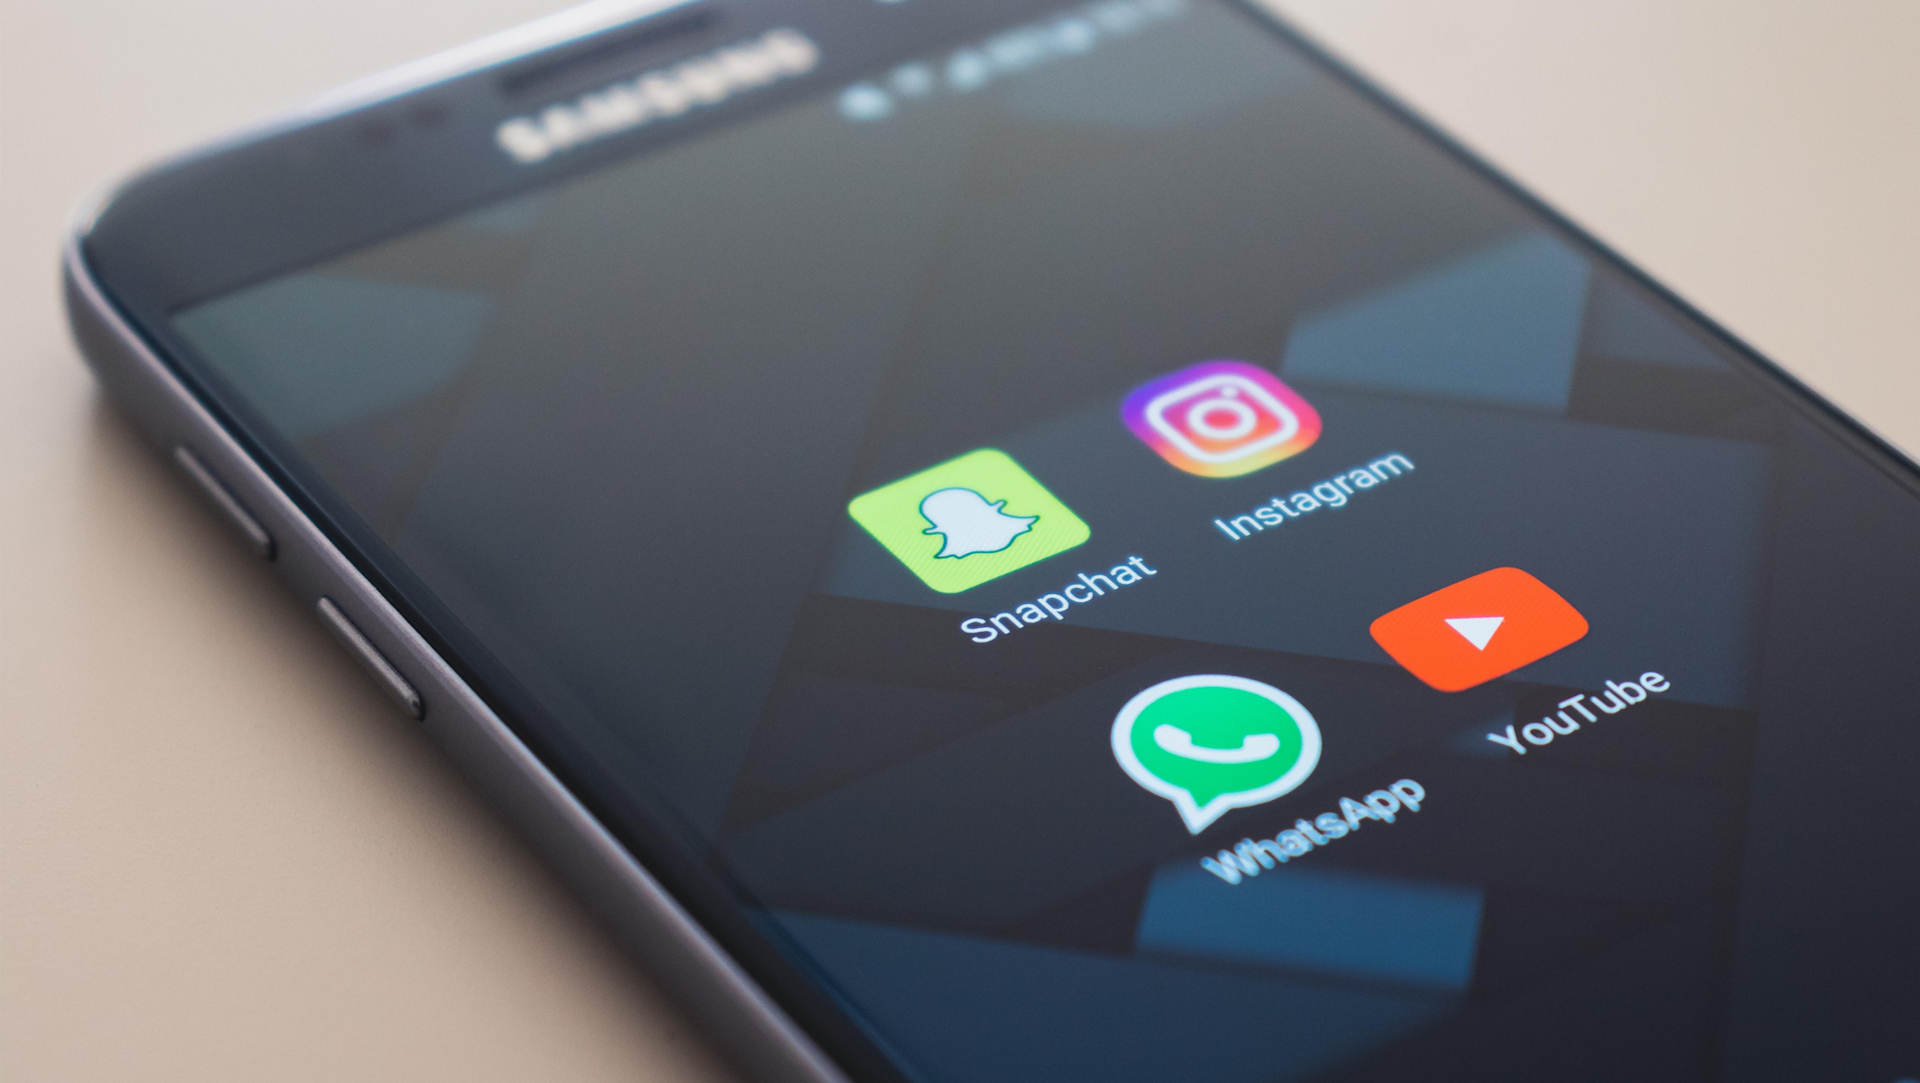 Icons of Snapchat, Instagram, WhatsApp and YouTube on a Samsung smartphone